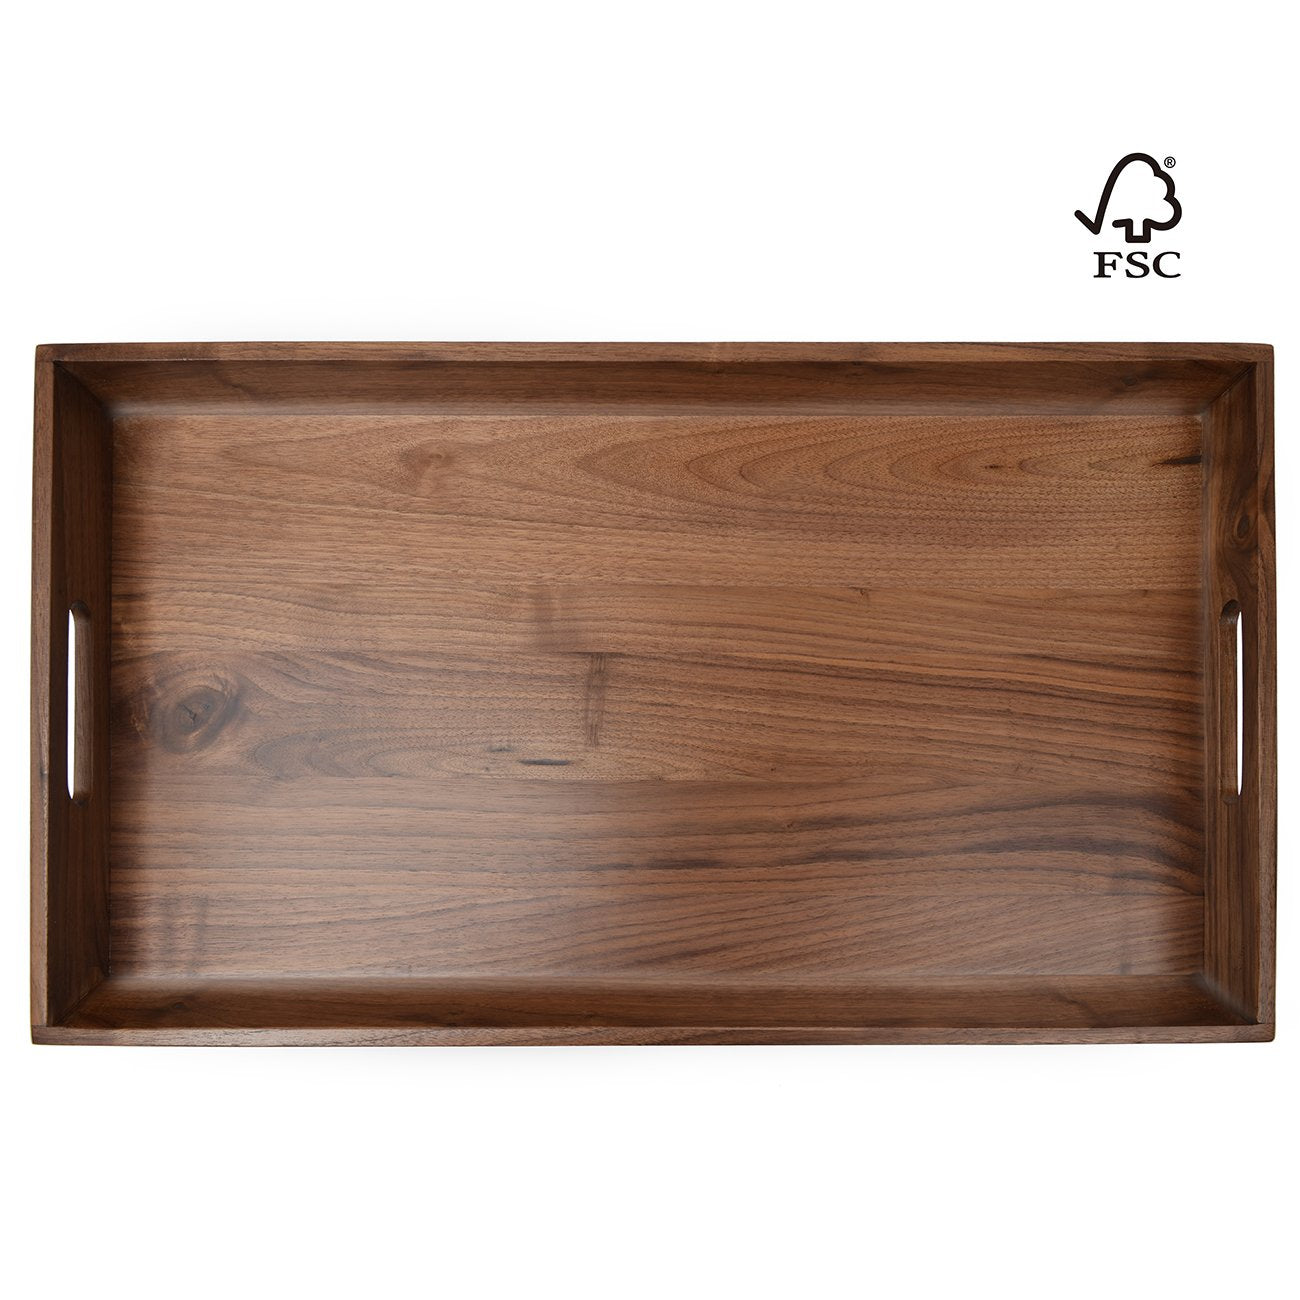 Kingcraft 24"x13" Extra Large Serving Tray With Handle Handmade Black Walnut Wooden Ottomans Tray